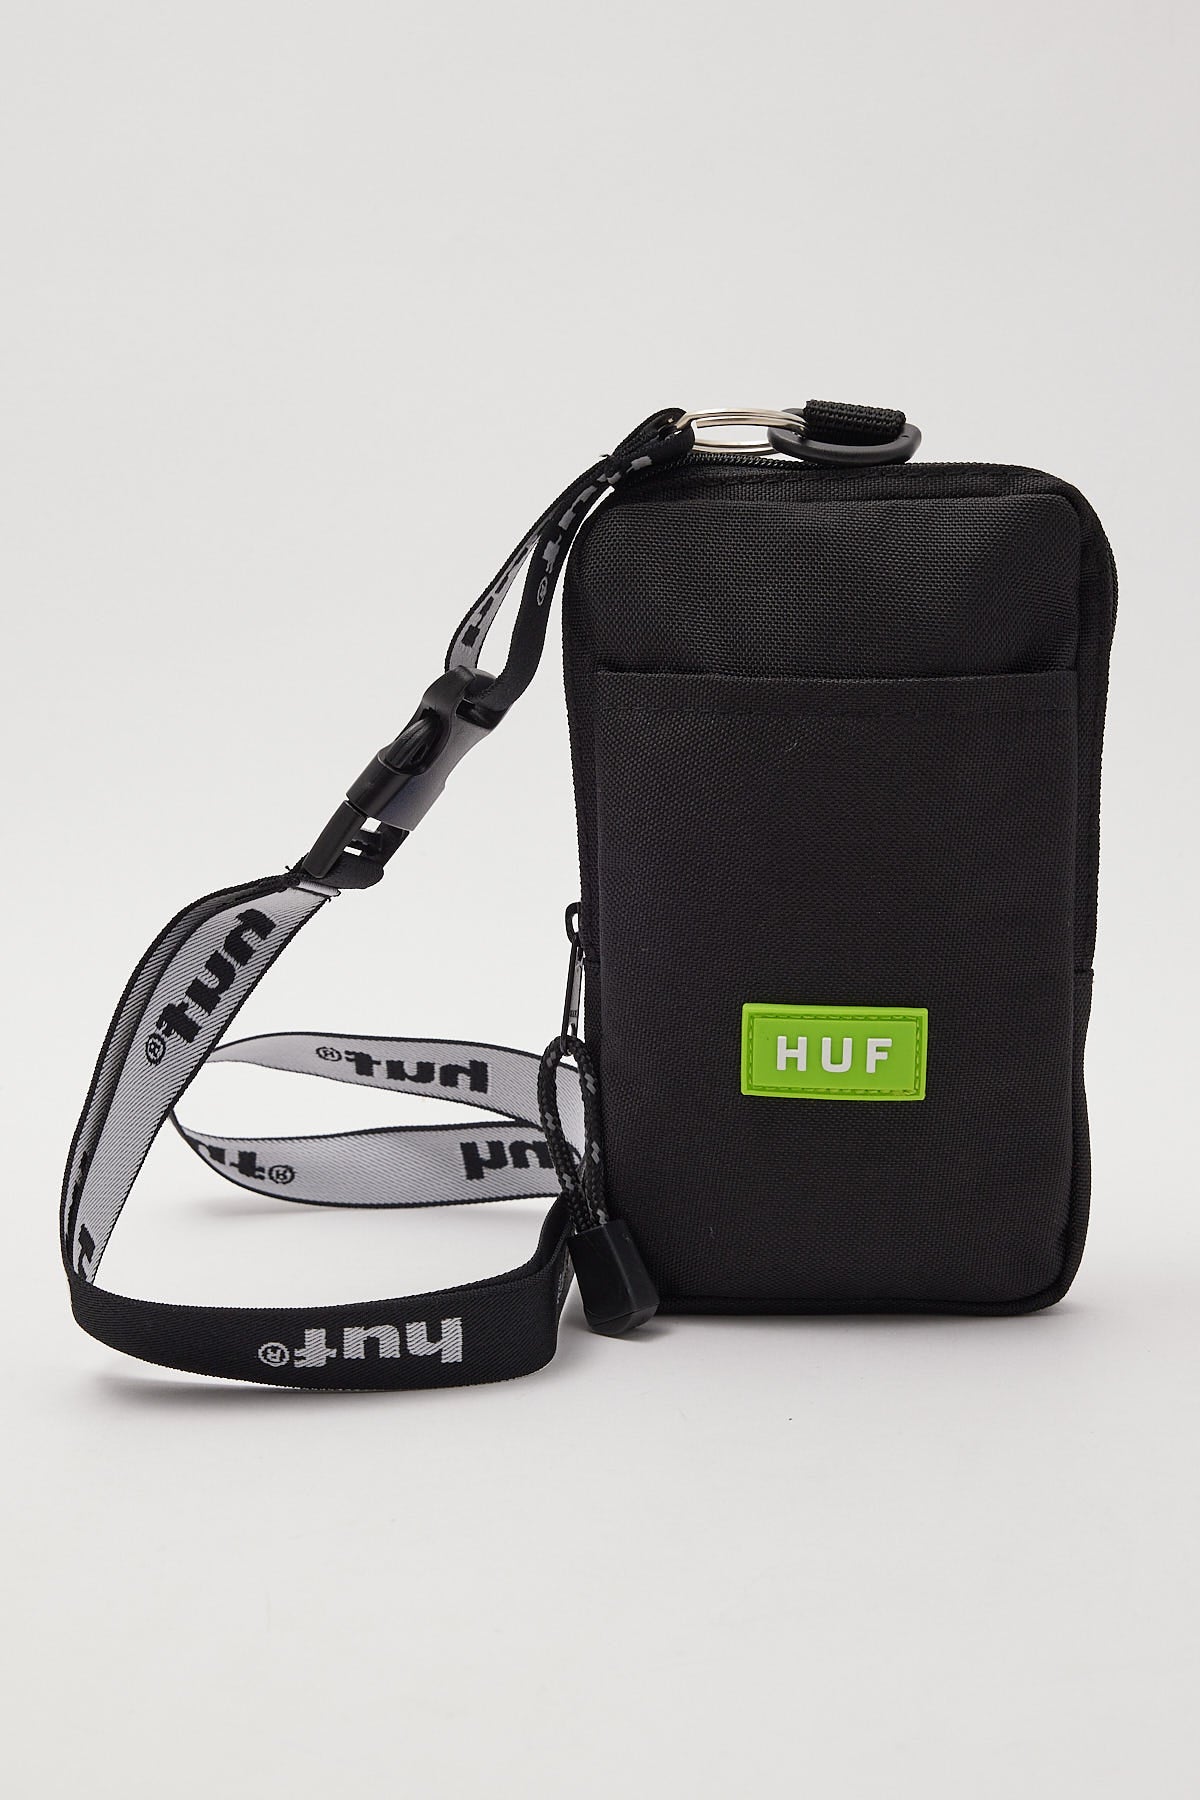 Huf Recon Lanyard Pouch Black